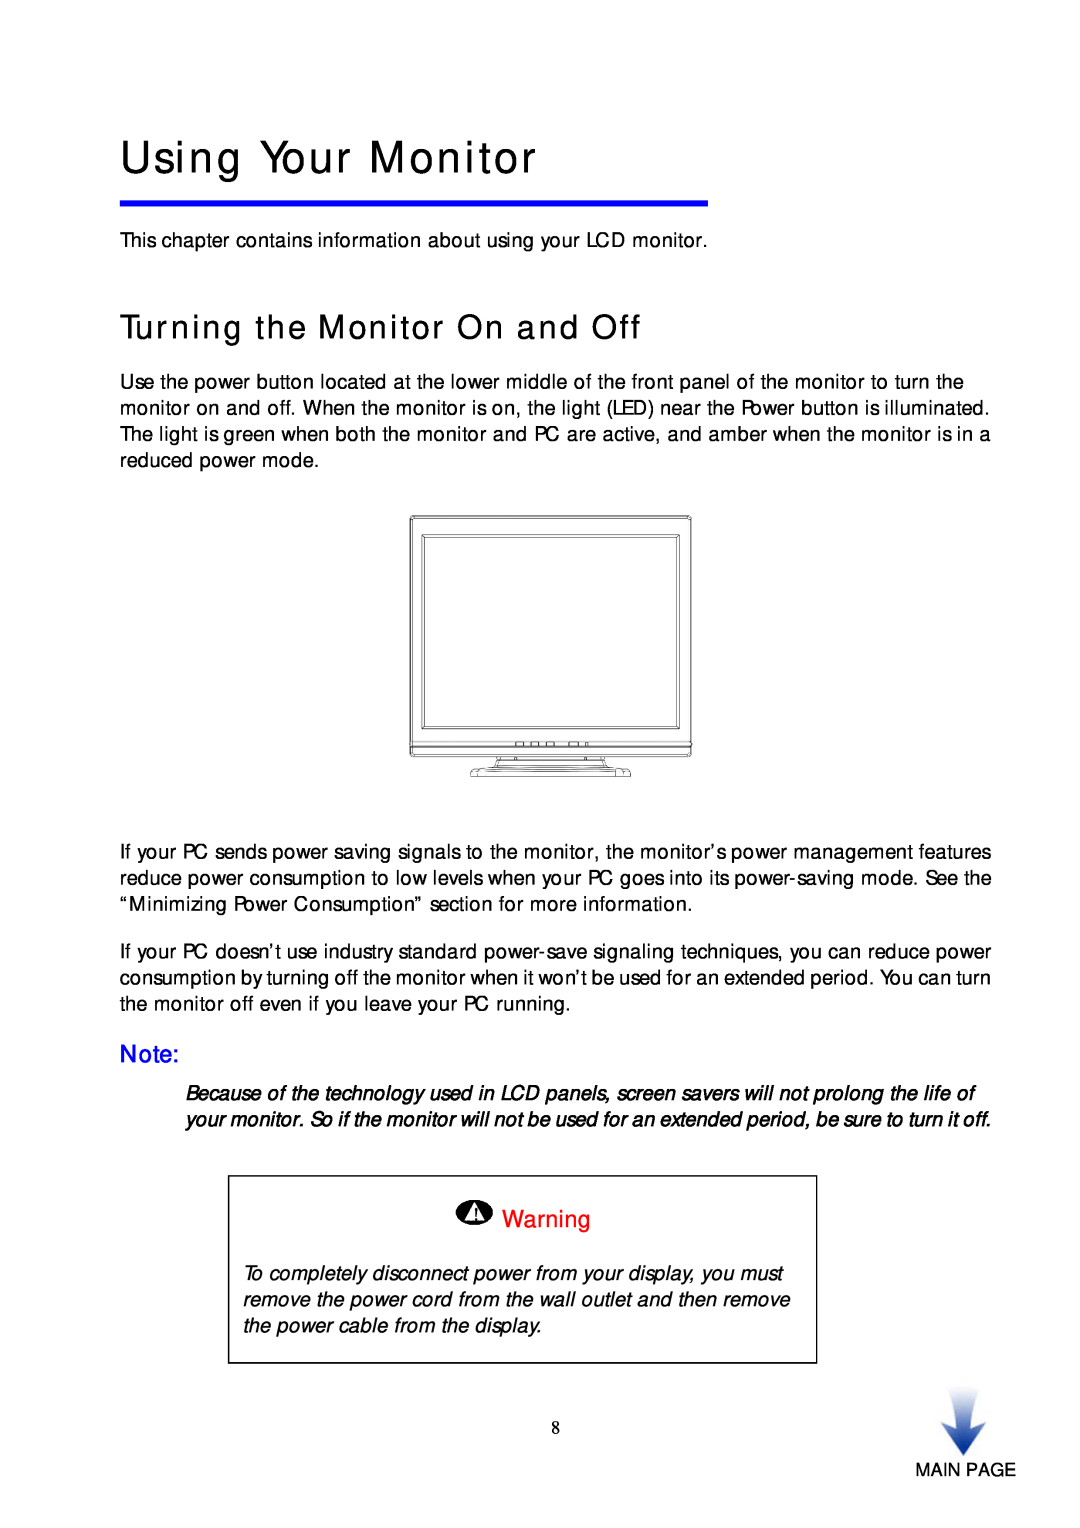 HP vf51 15 inch manual Using Your Monitor, Turning the Monitor On and Off 